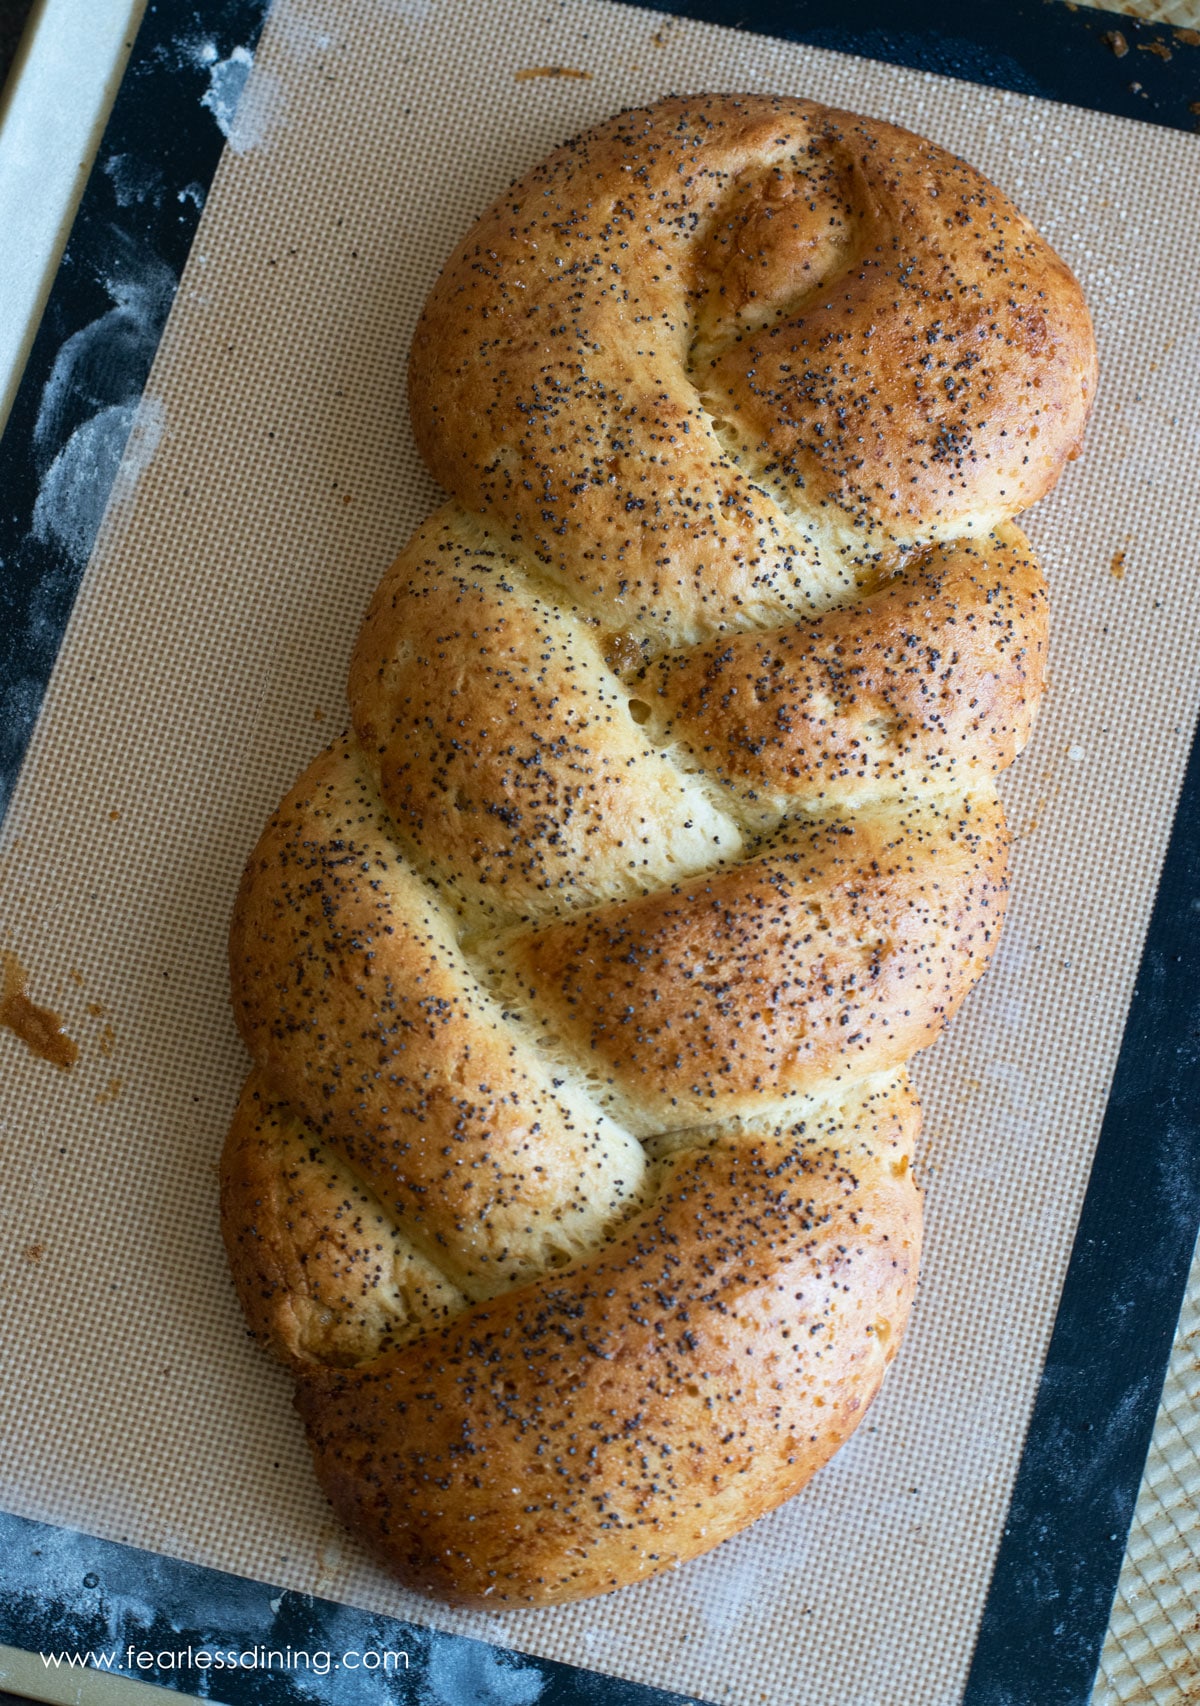 A whole gluten free challah that came out of the oven.